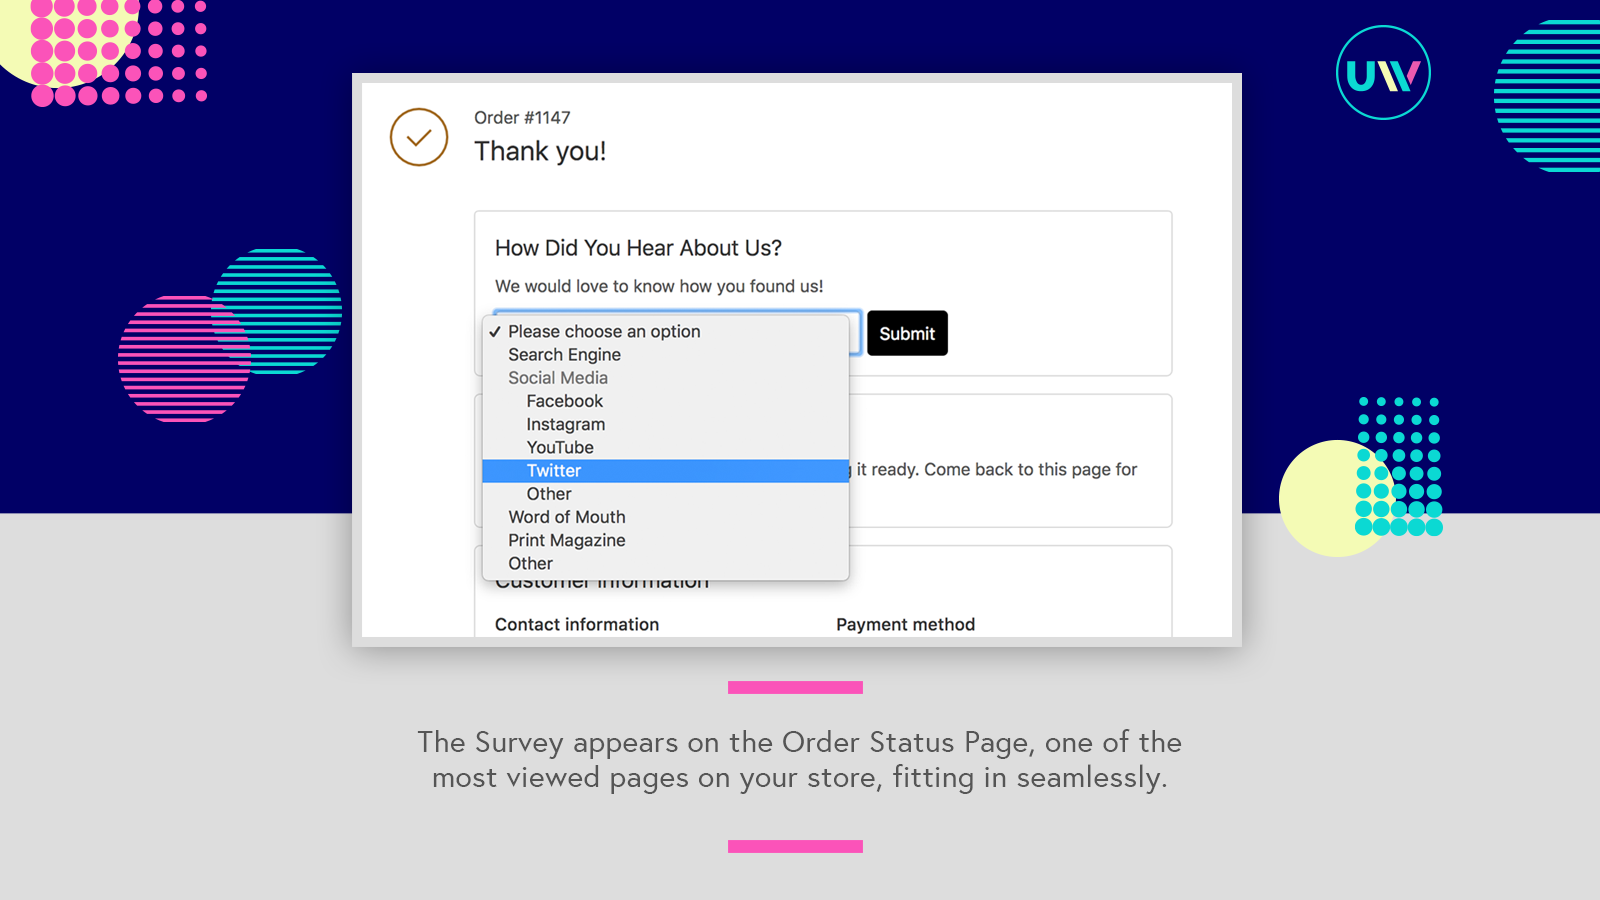 The Survey widget on the Order Status Page